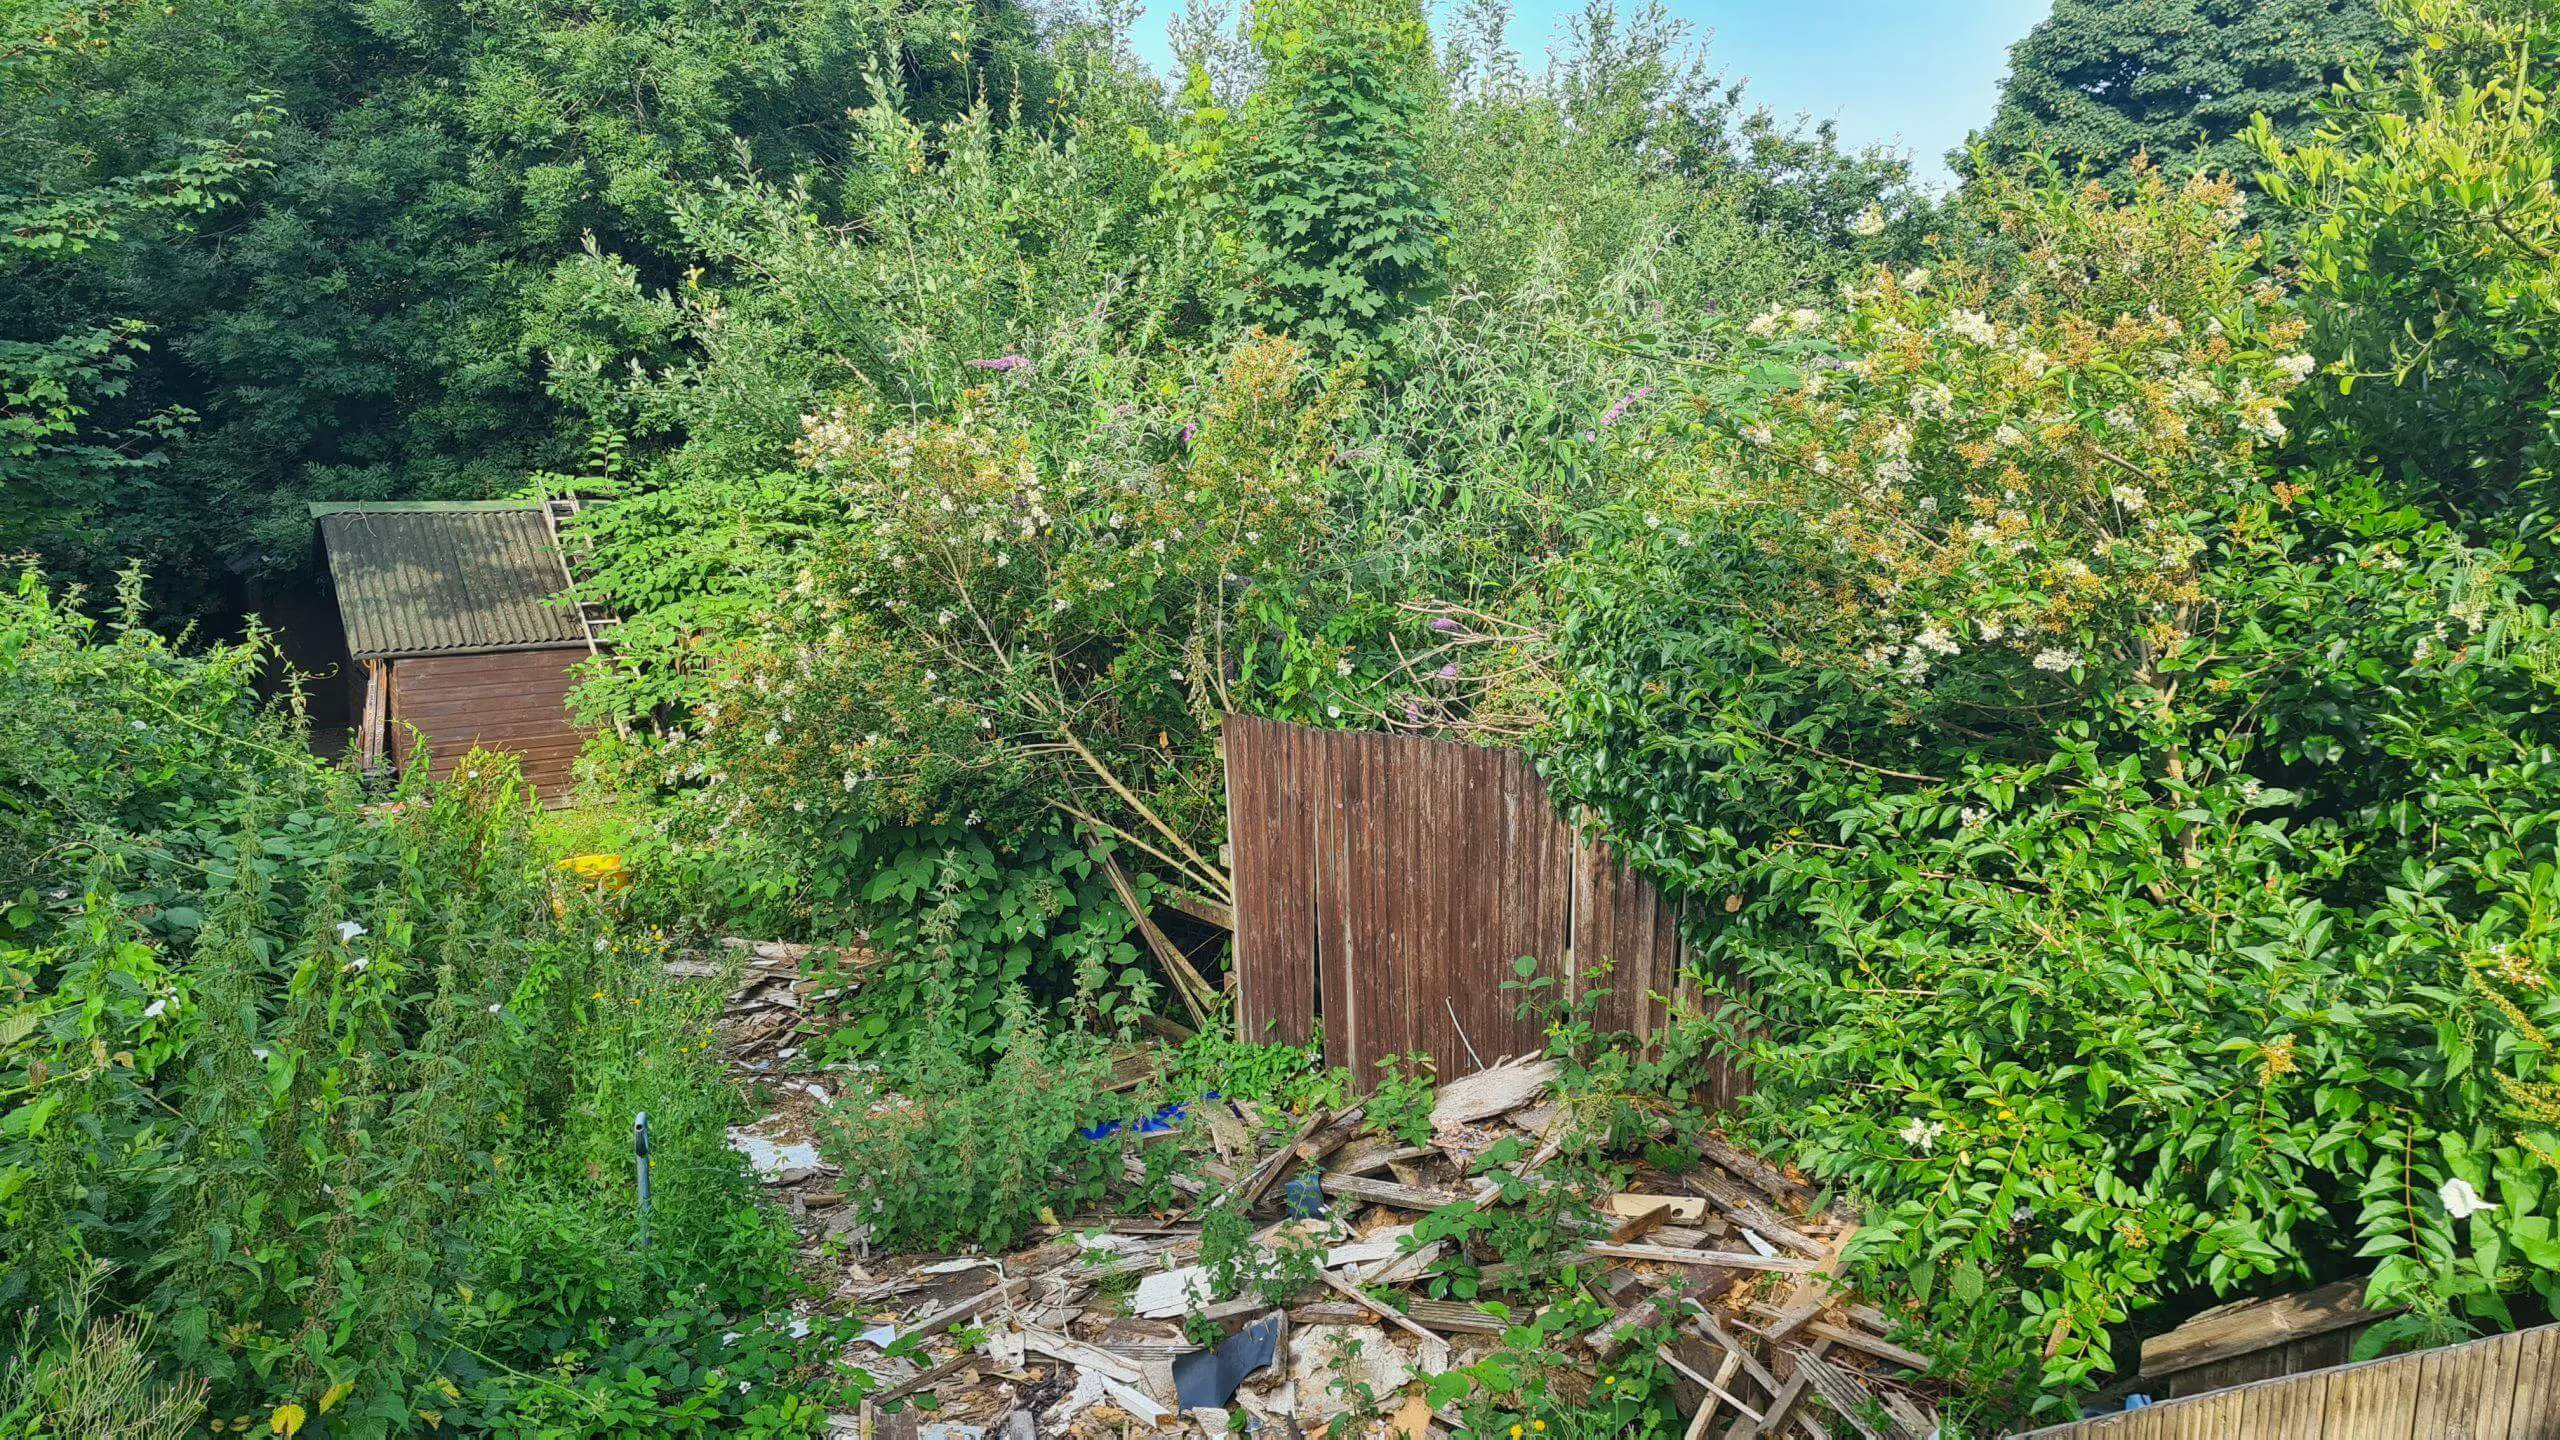 The environmental impact of invasive weeds can consume a once beautiful garden and destroy fences and buildings too